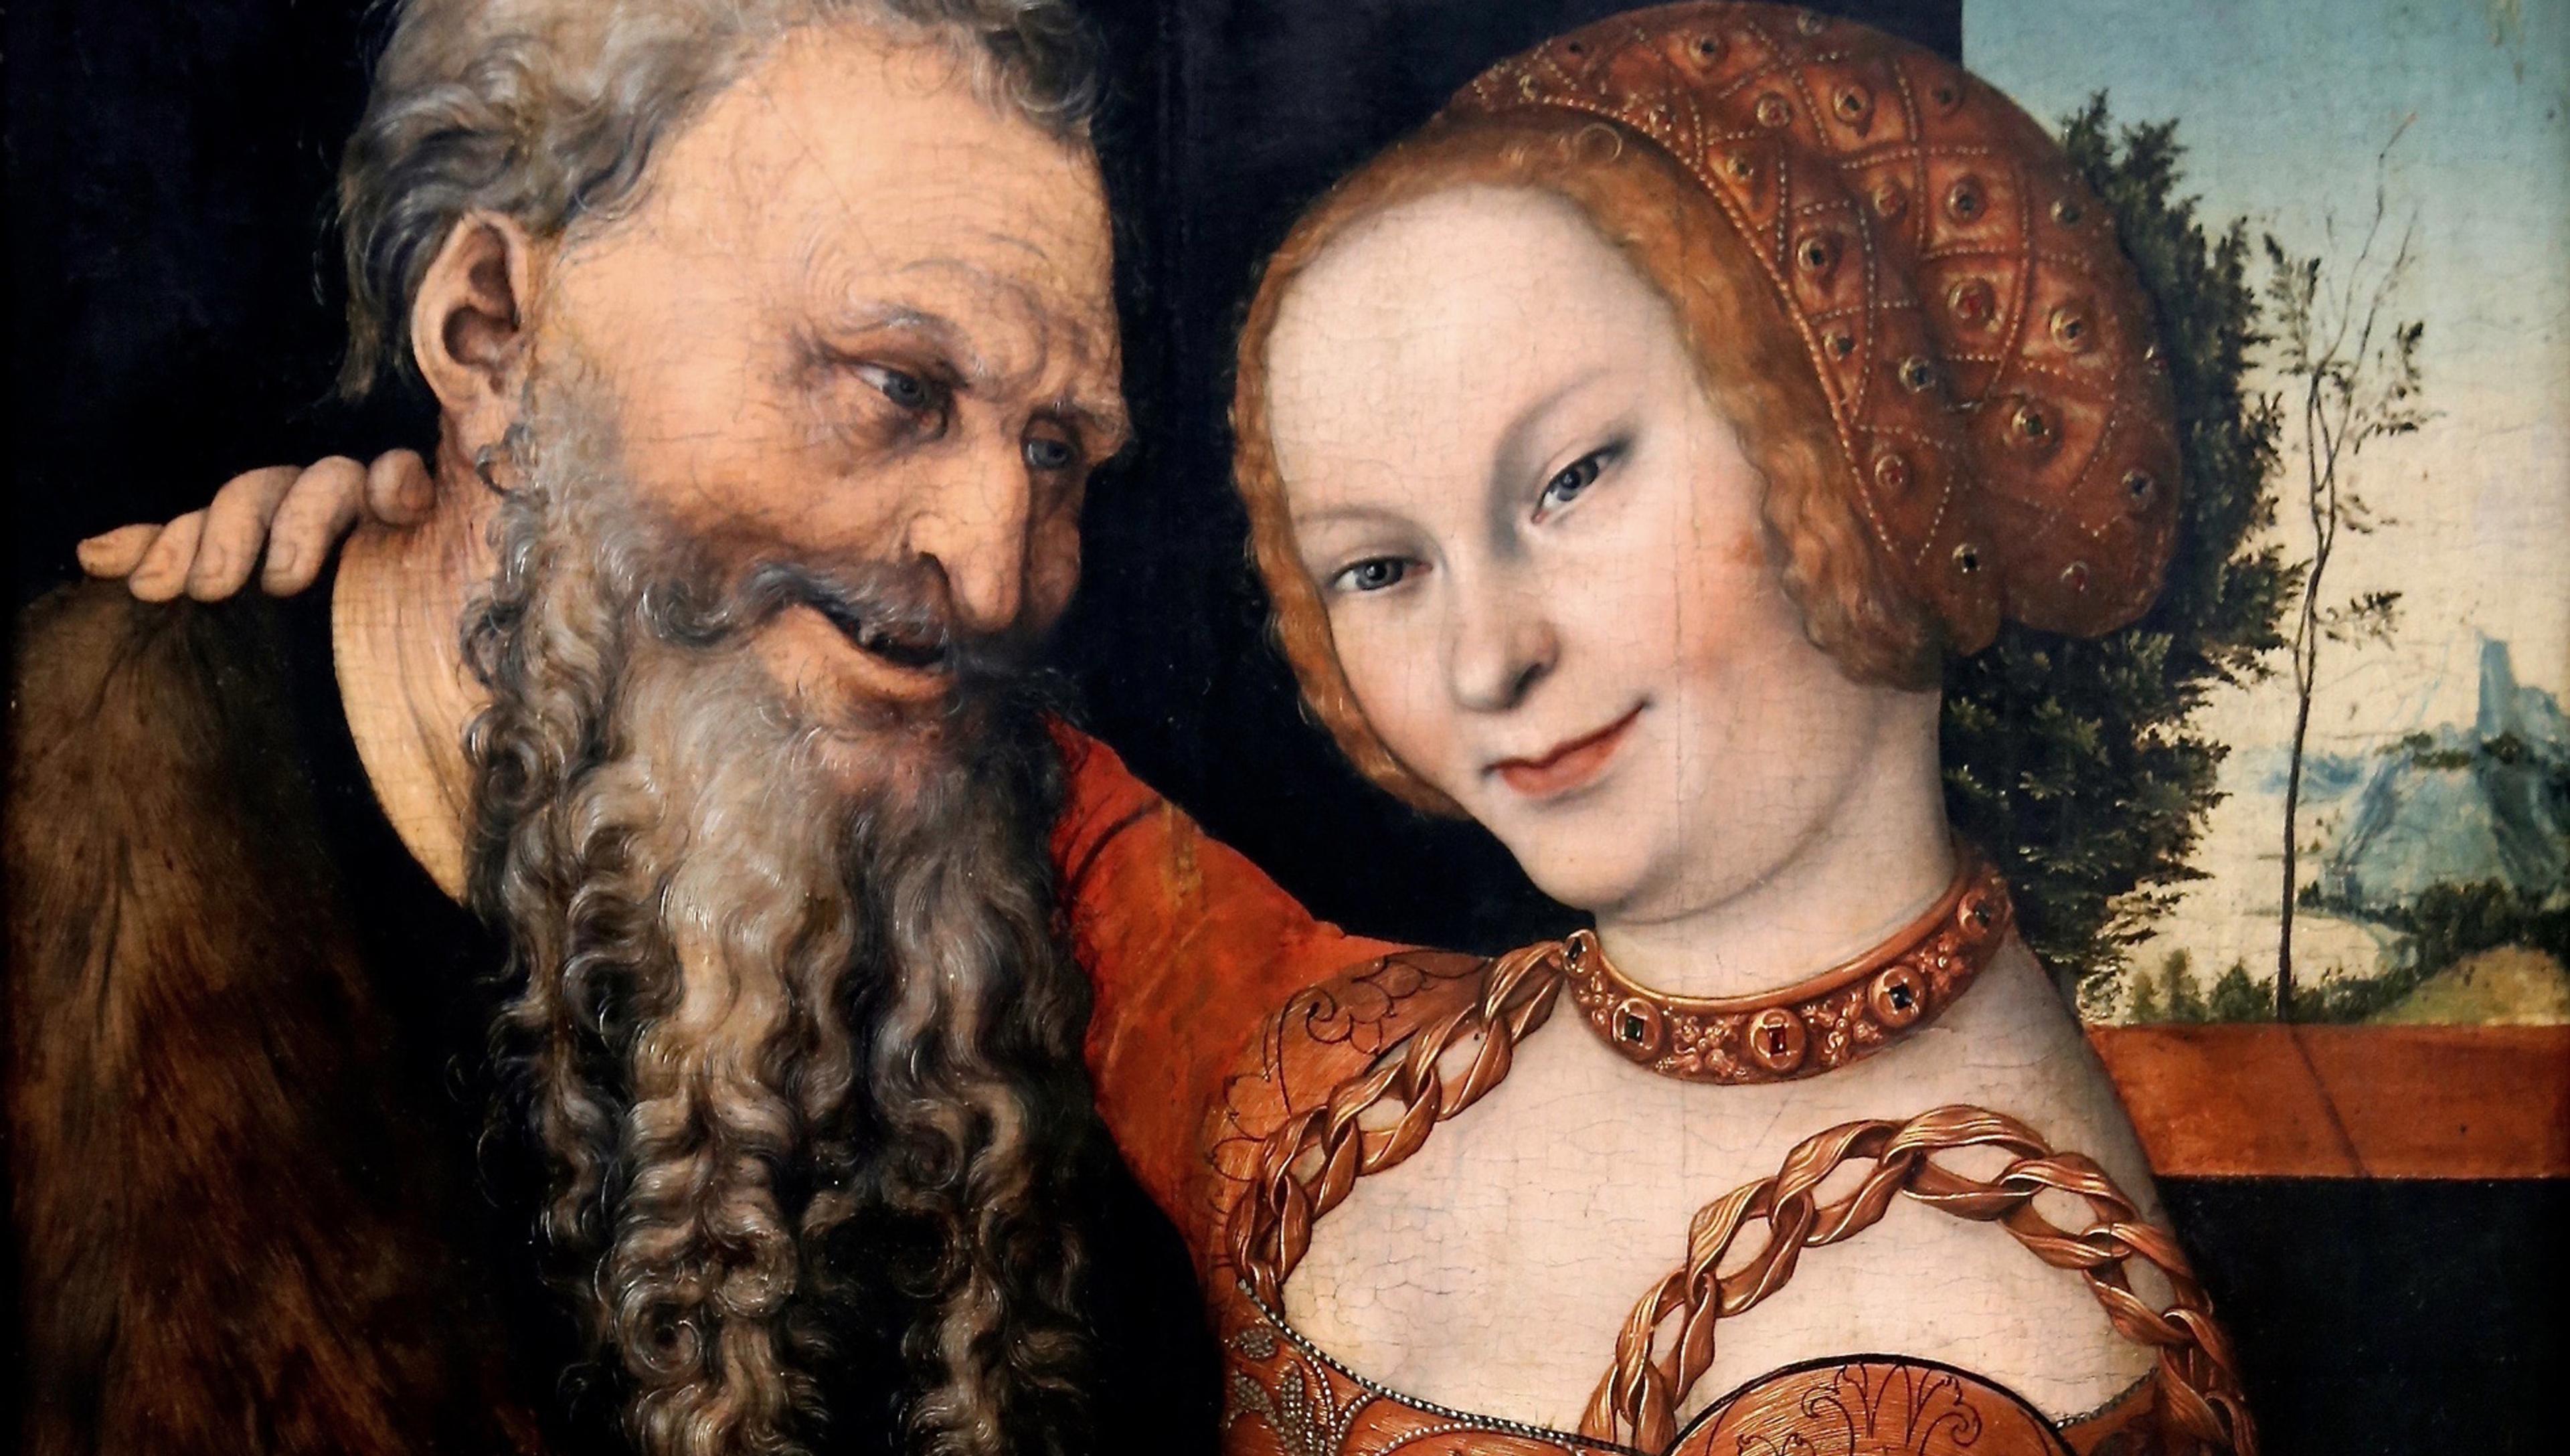 A painting of an older man with a beard smiling at a young woman with braided hair in a red dress, their heads close together.